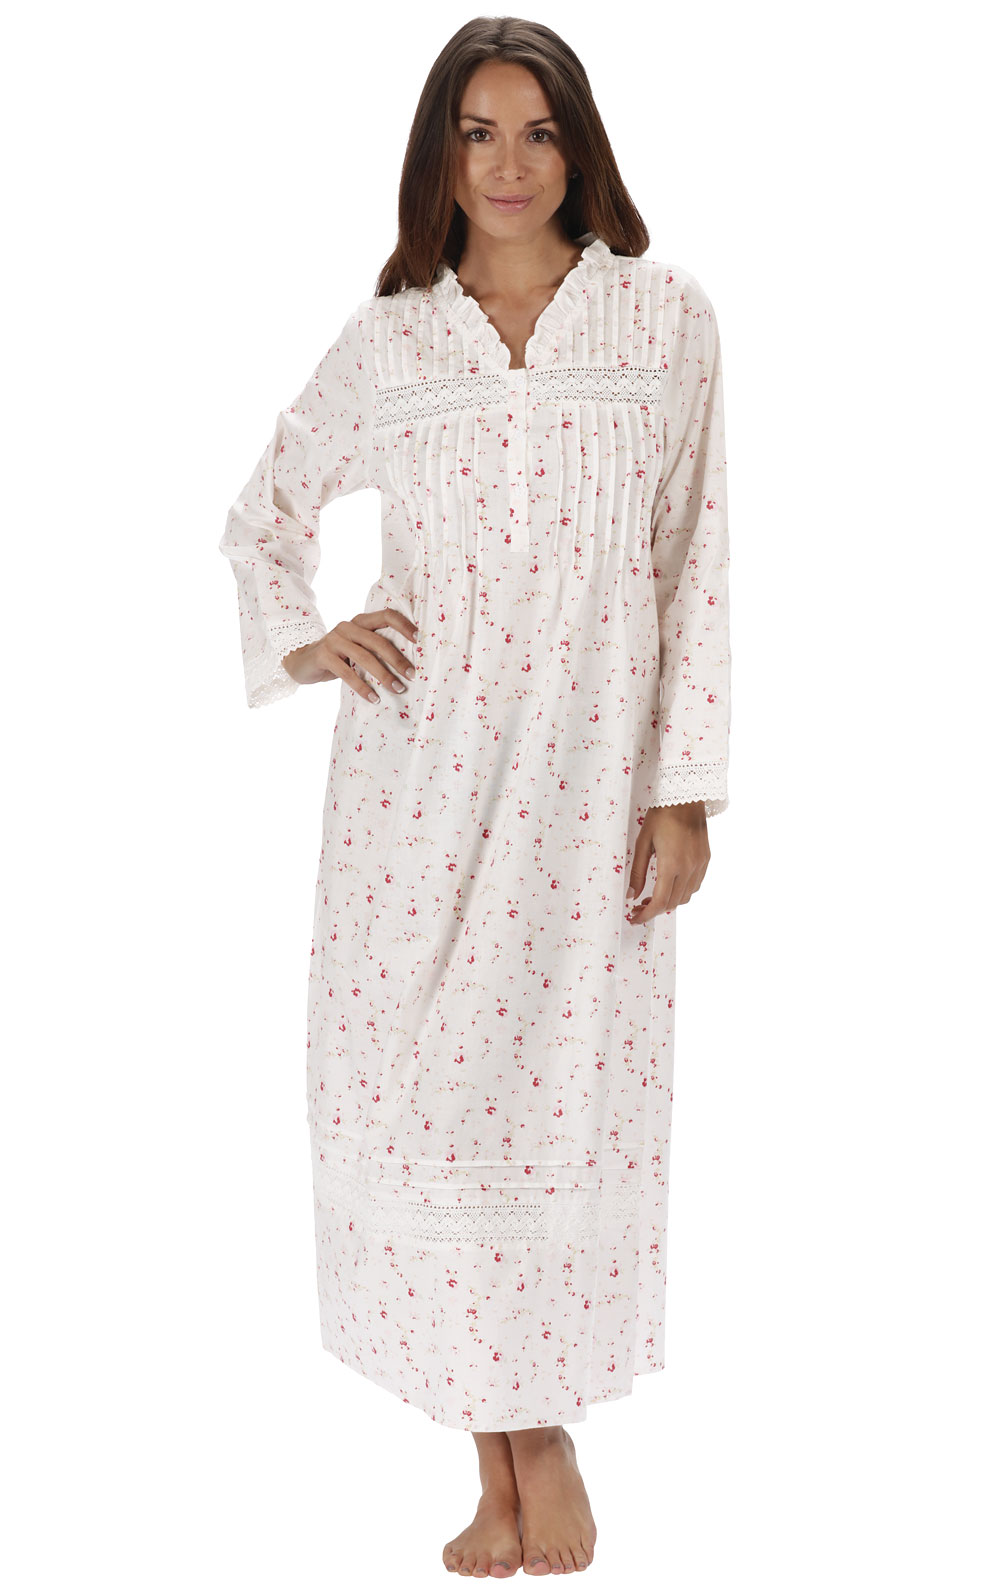 Long Sleeve Cotton Nightgown | Nightgown for Women | The 1 For U